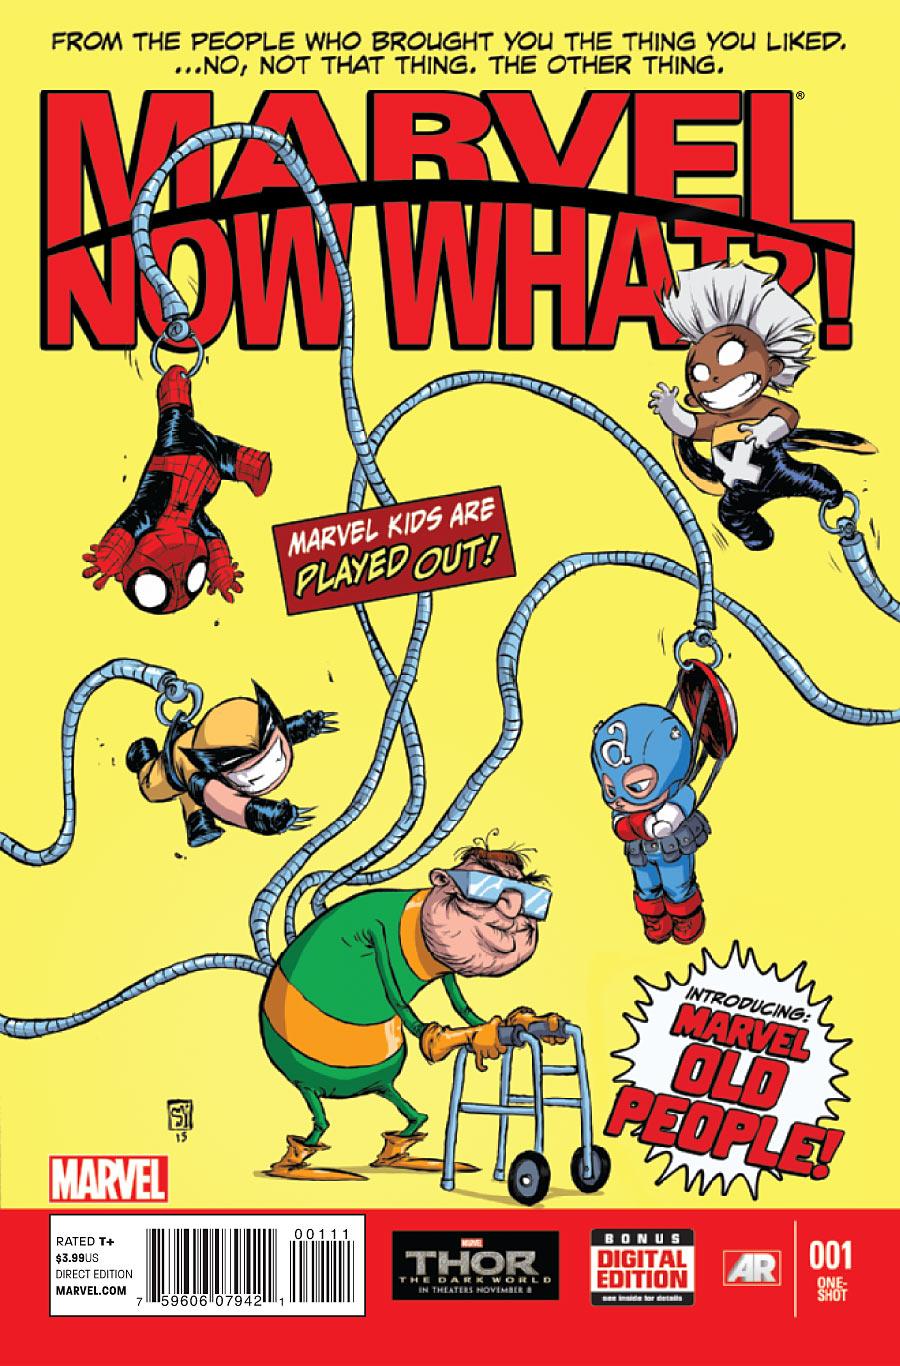 Marvel: NOW WHAT! Vol. 1 #1